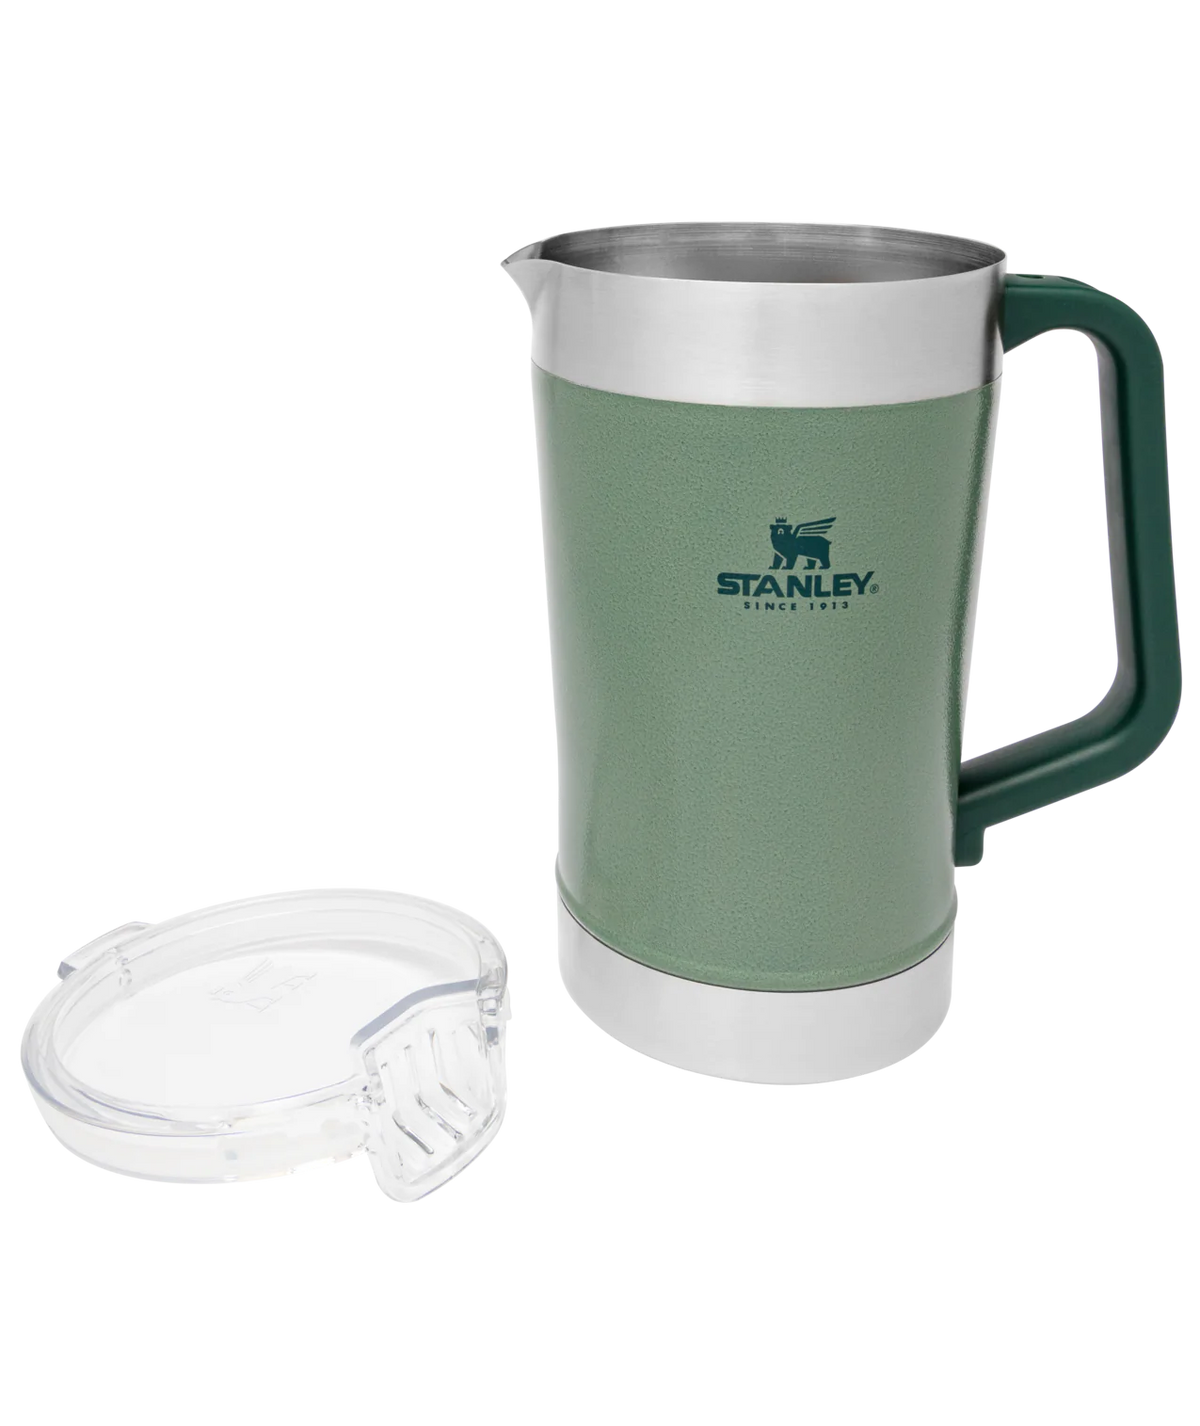 https://www.shoprachellem.shop/wp-content/uploads/1692/92/buy-our-stanley-classic-stay-chill-beer-pitcher-64-oz-hammertone-green-stanley-and-get-the-best-deal_1.png